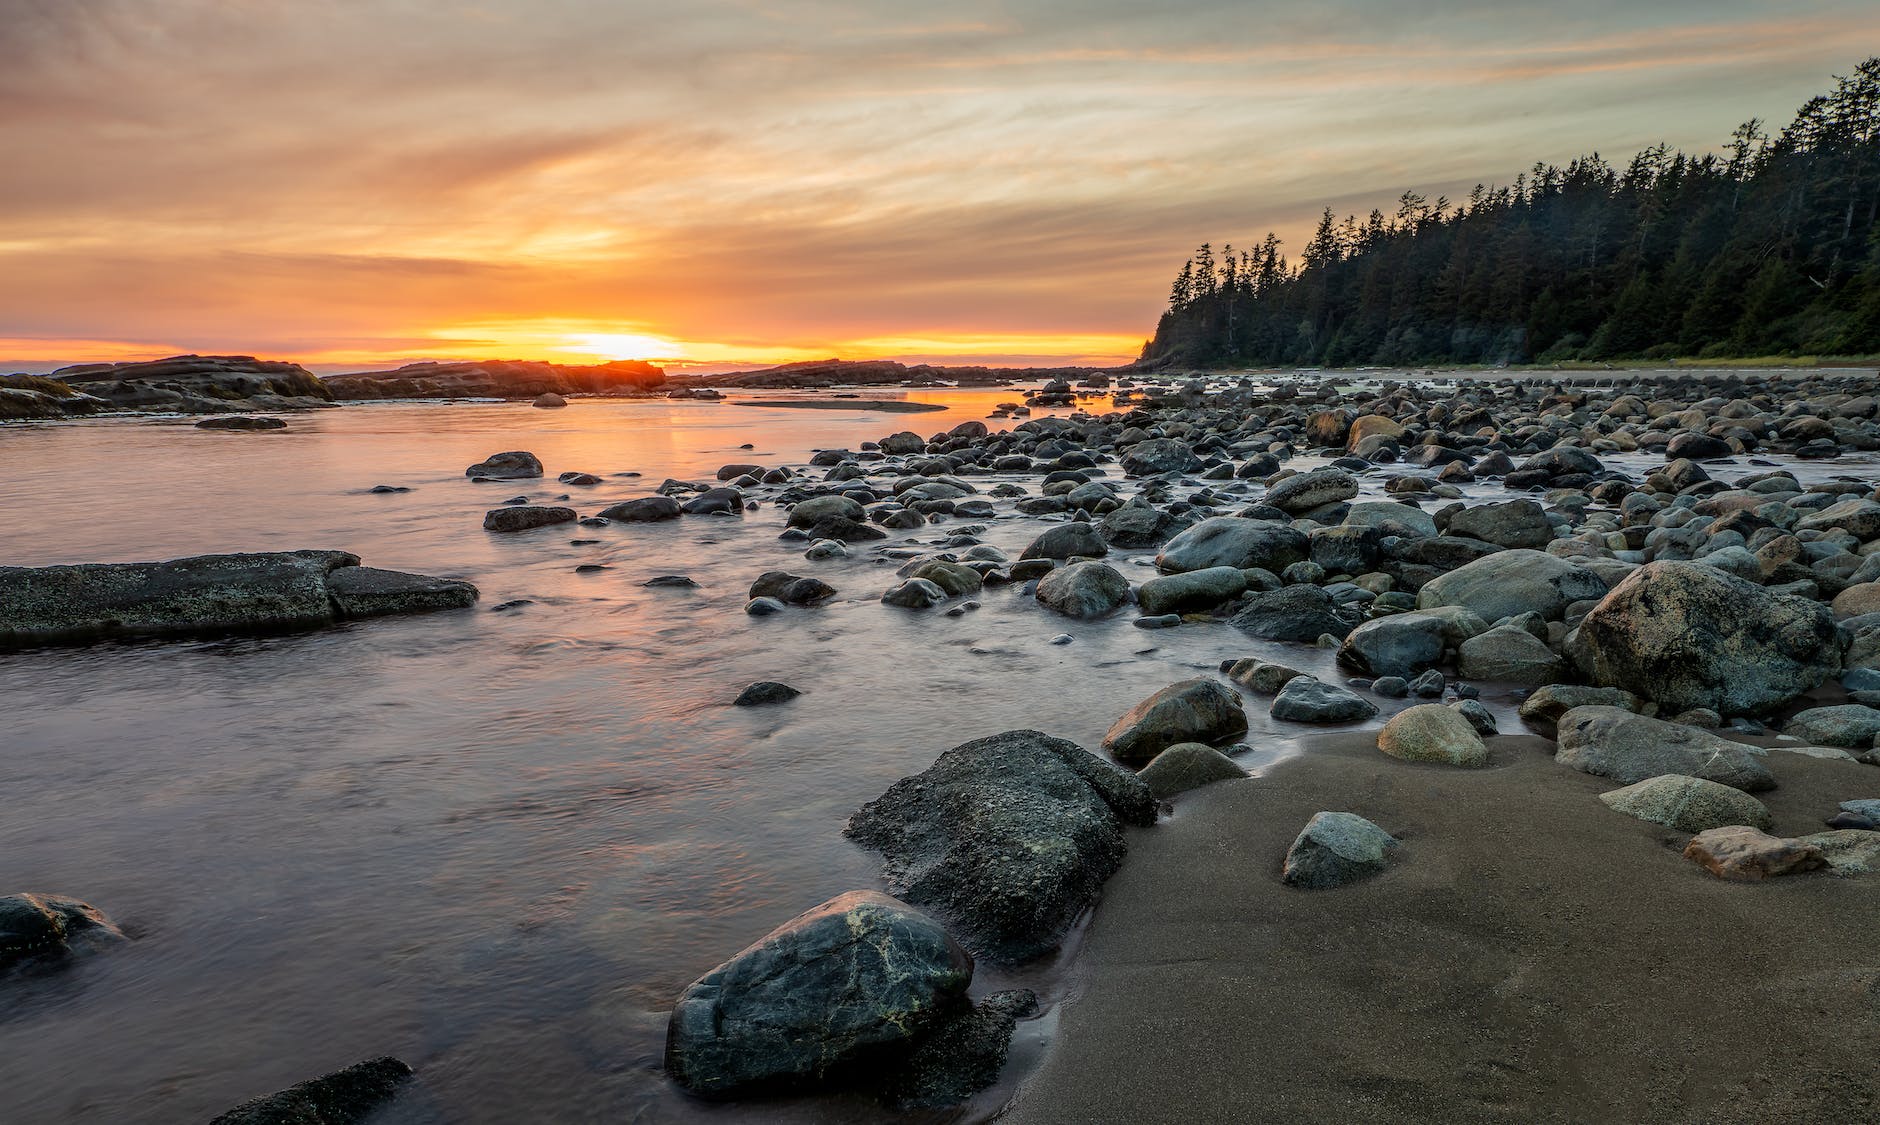 rocky shore with rocks on the shore during sunset